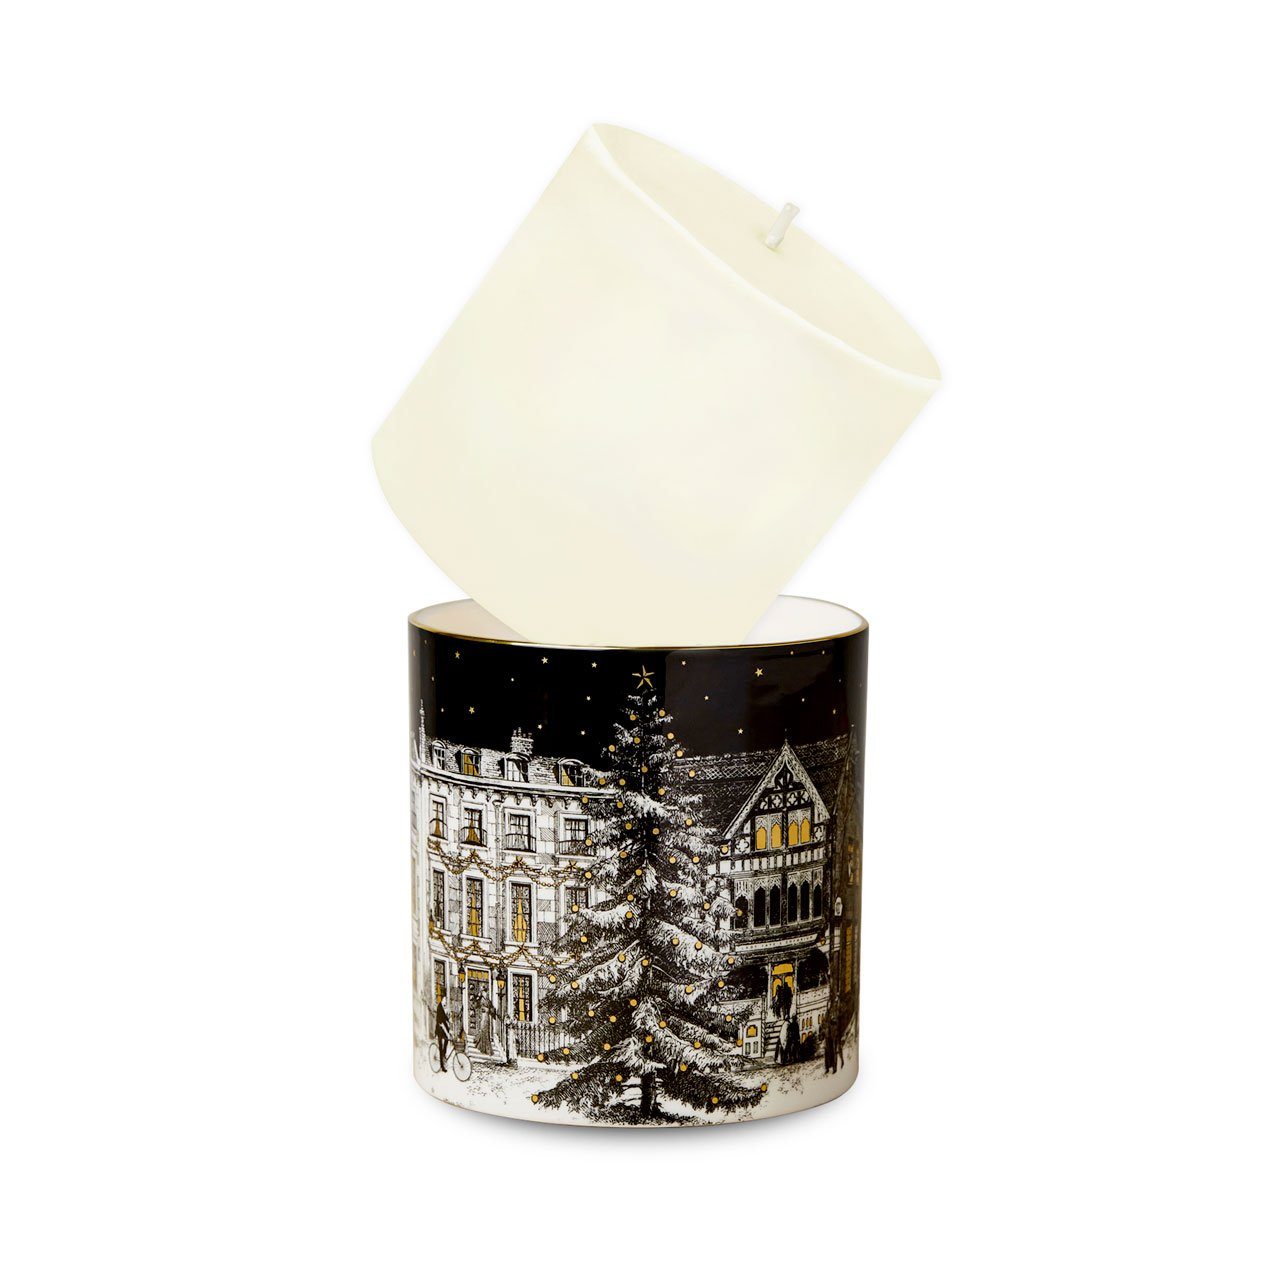 Refill for The Starry Night Ceramic Candle